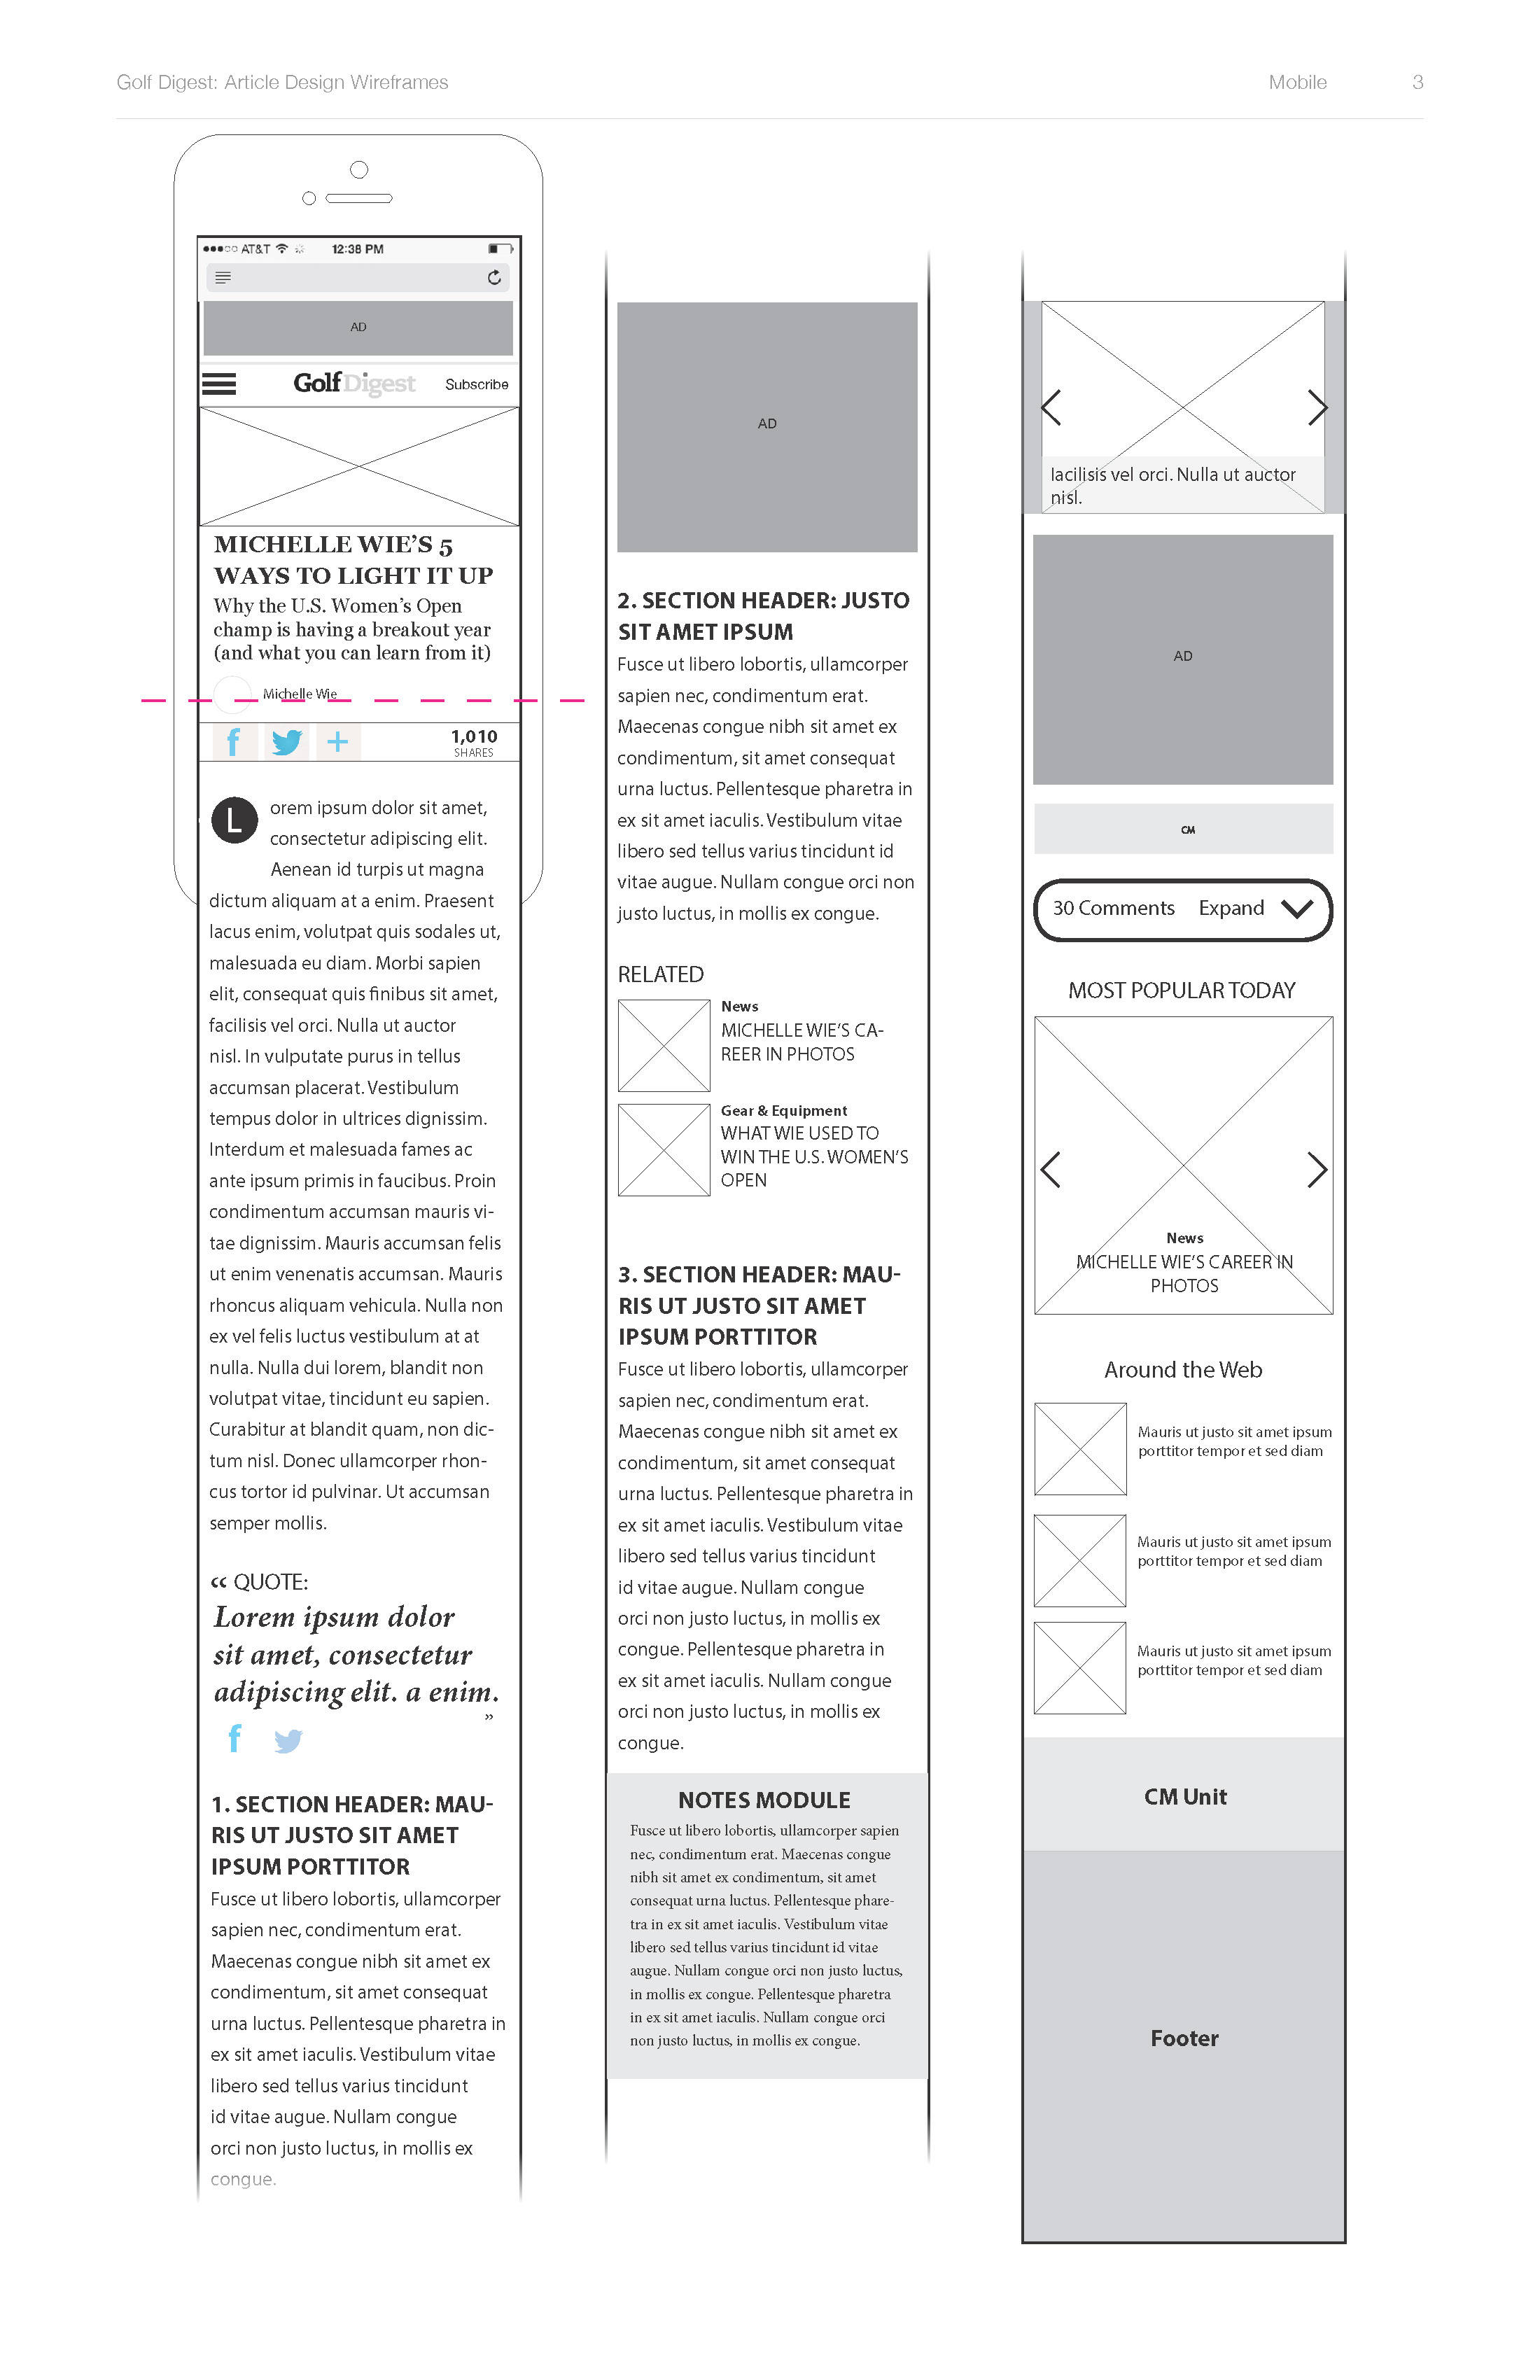 GD_Article_Wireframes_v2_Page_3.jpg